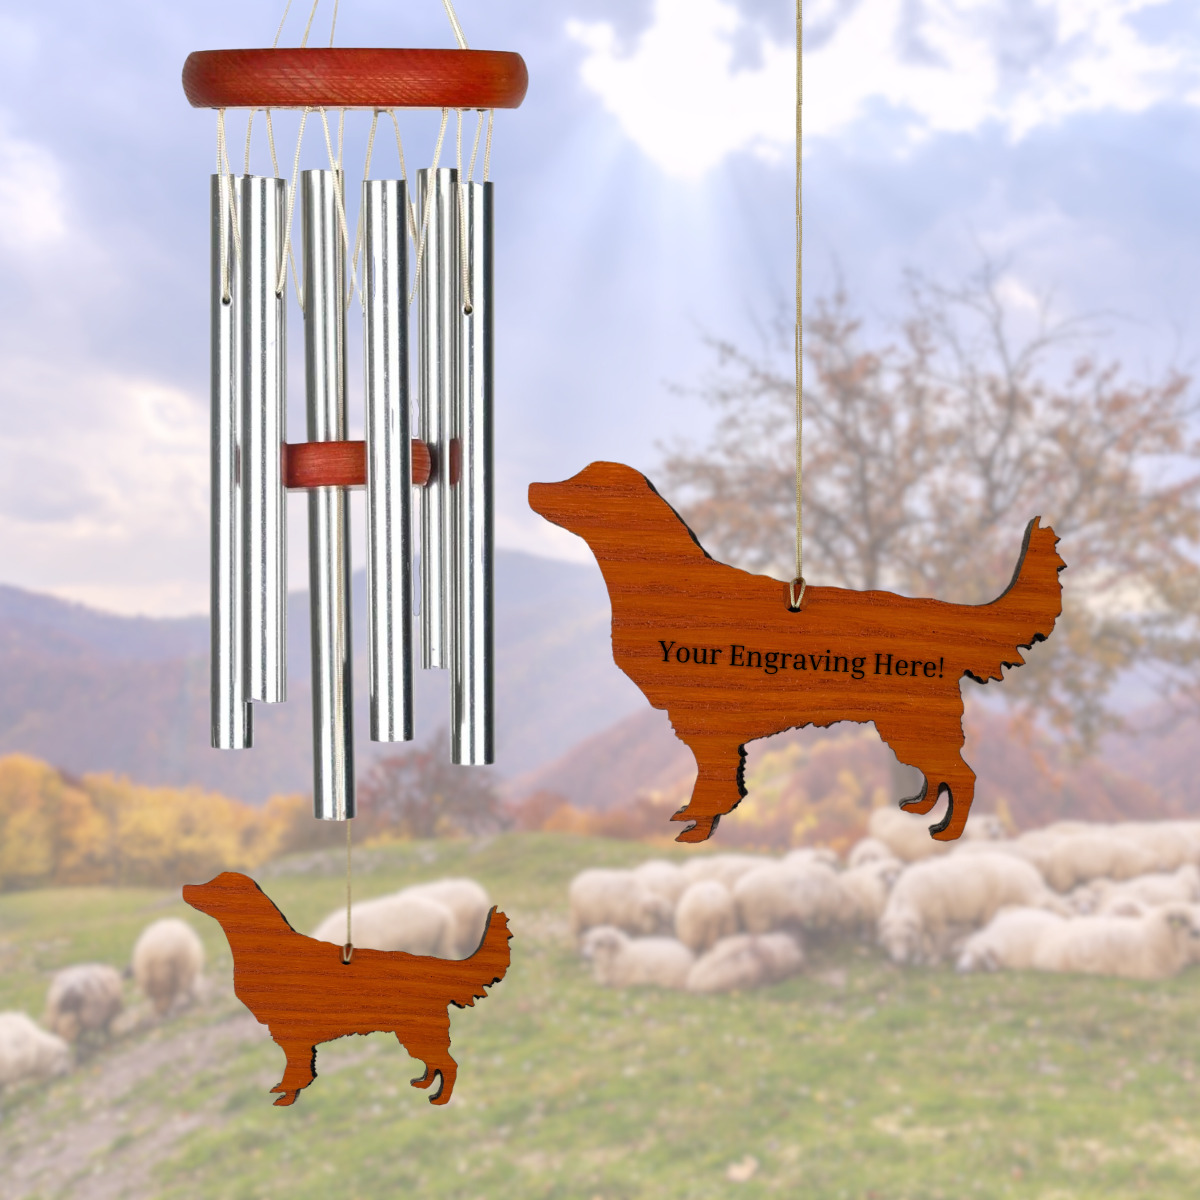 Amazing Grace 16 Inch Silver Wind Chime - Engravable Dog Sail